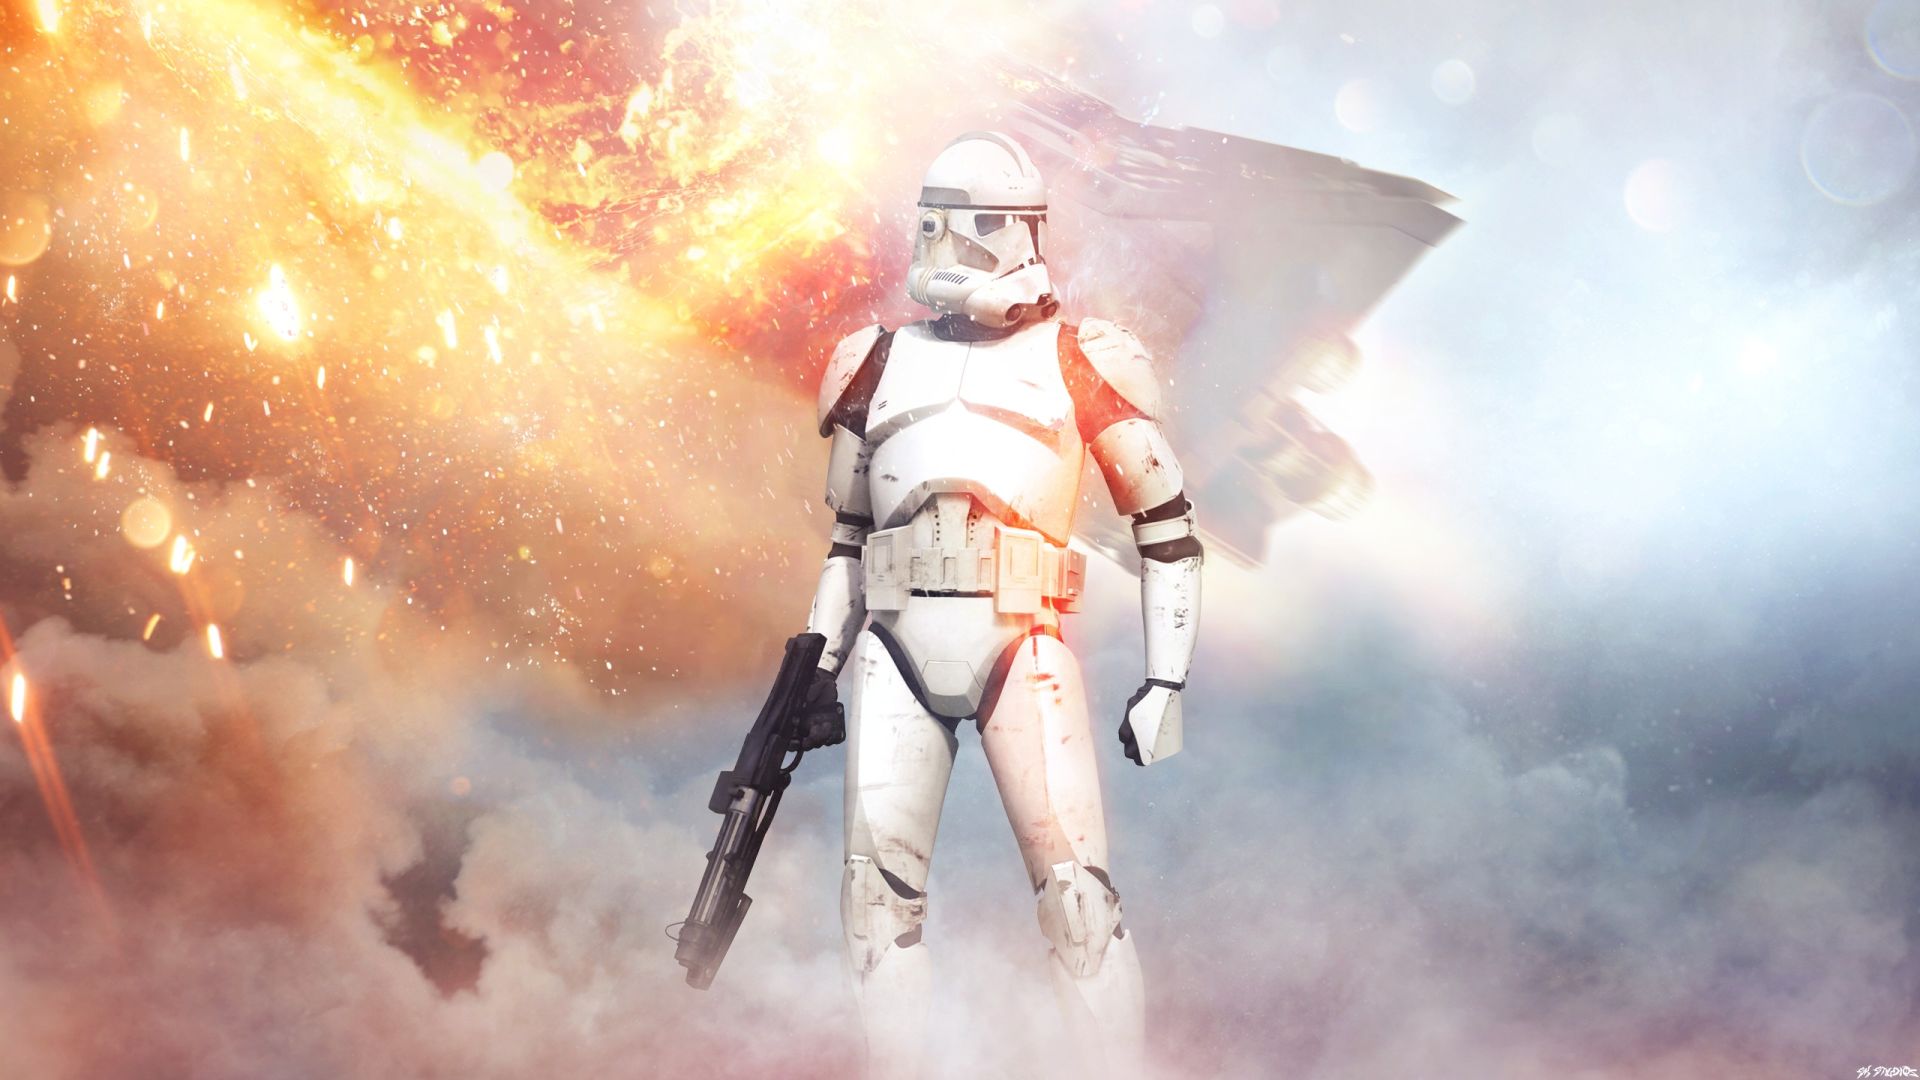 star wars wallpaper free,illustration,cg artwork,fictional character,space,action figure